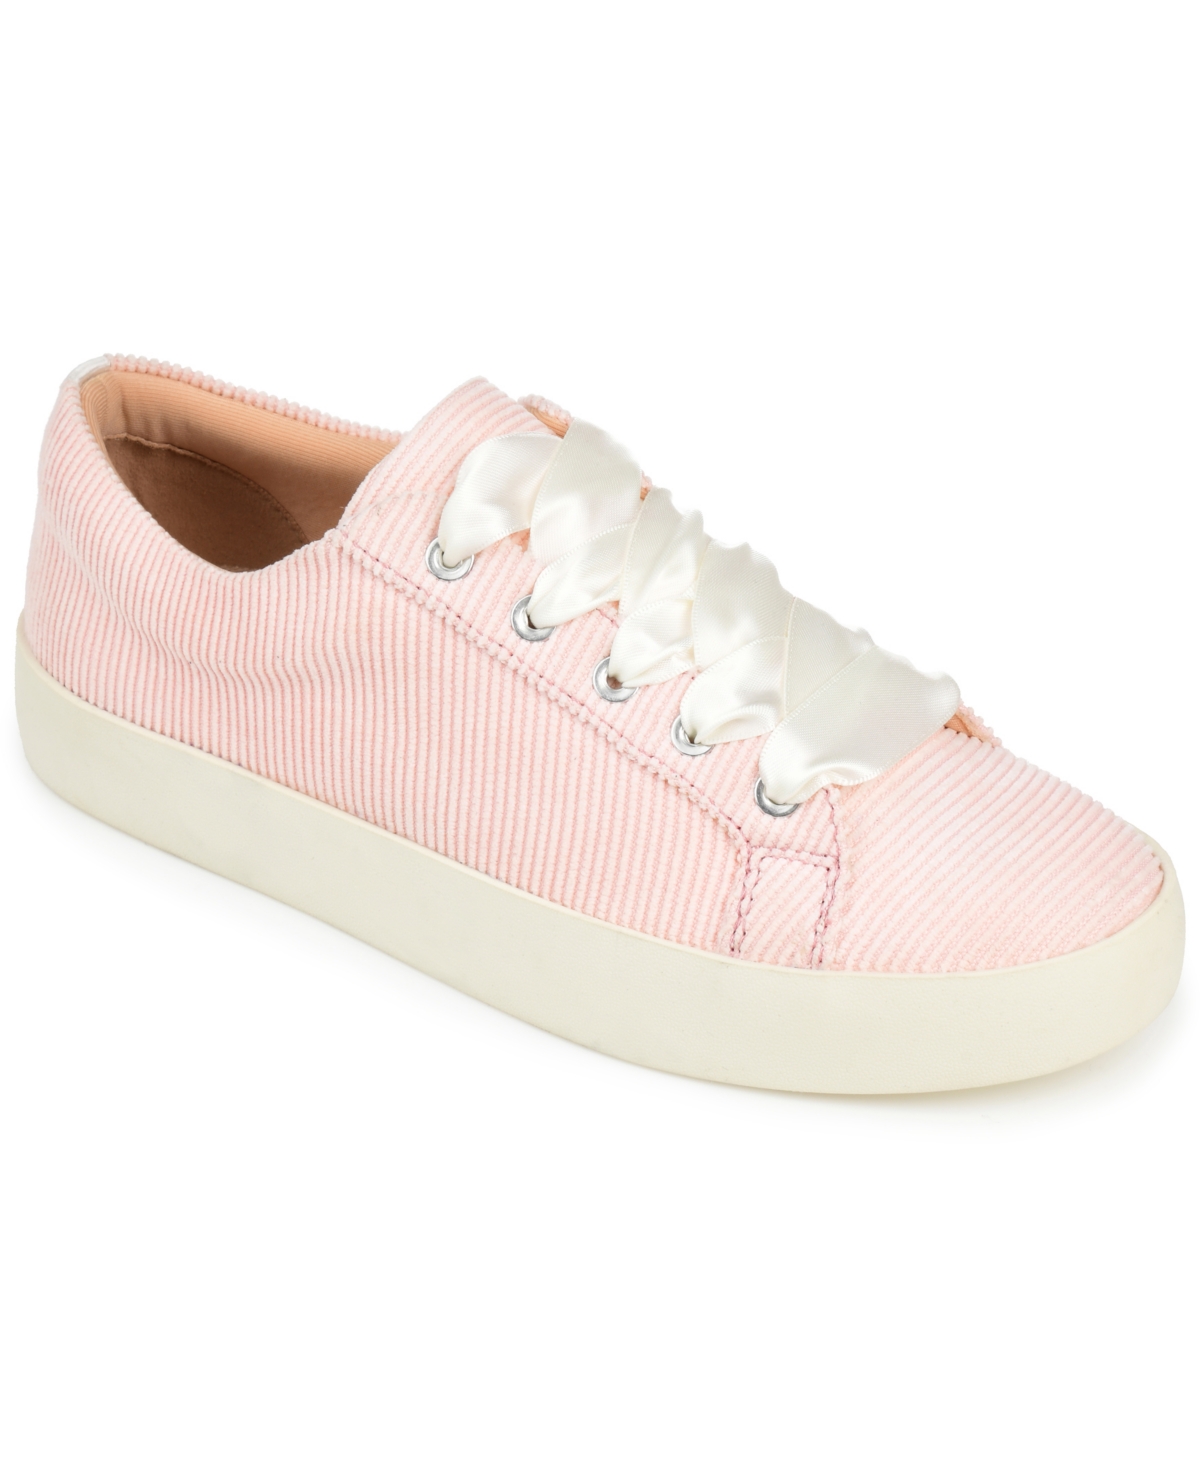 Women's Kinsley Corduroy Lace Up Sneakers - White